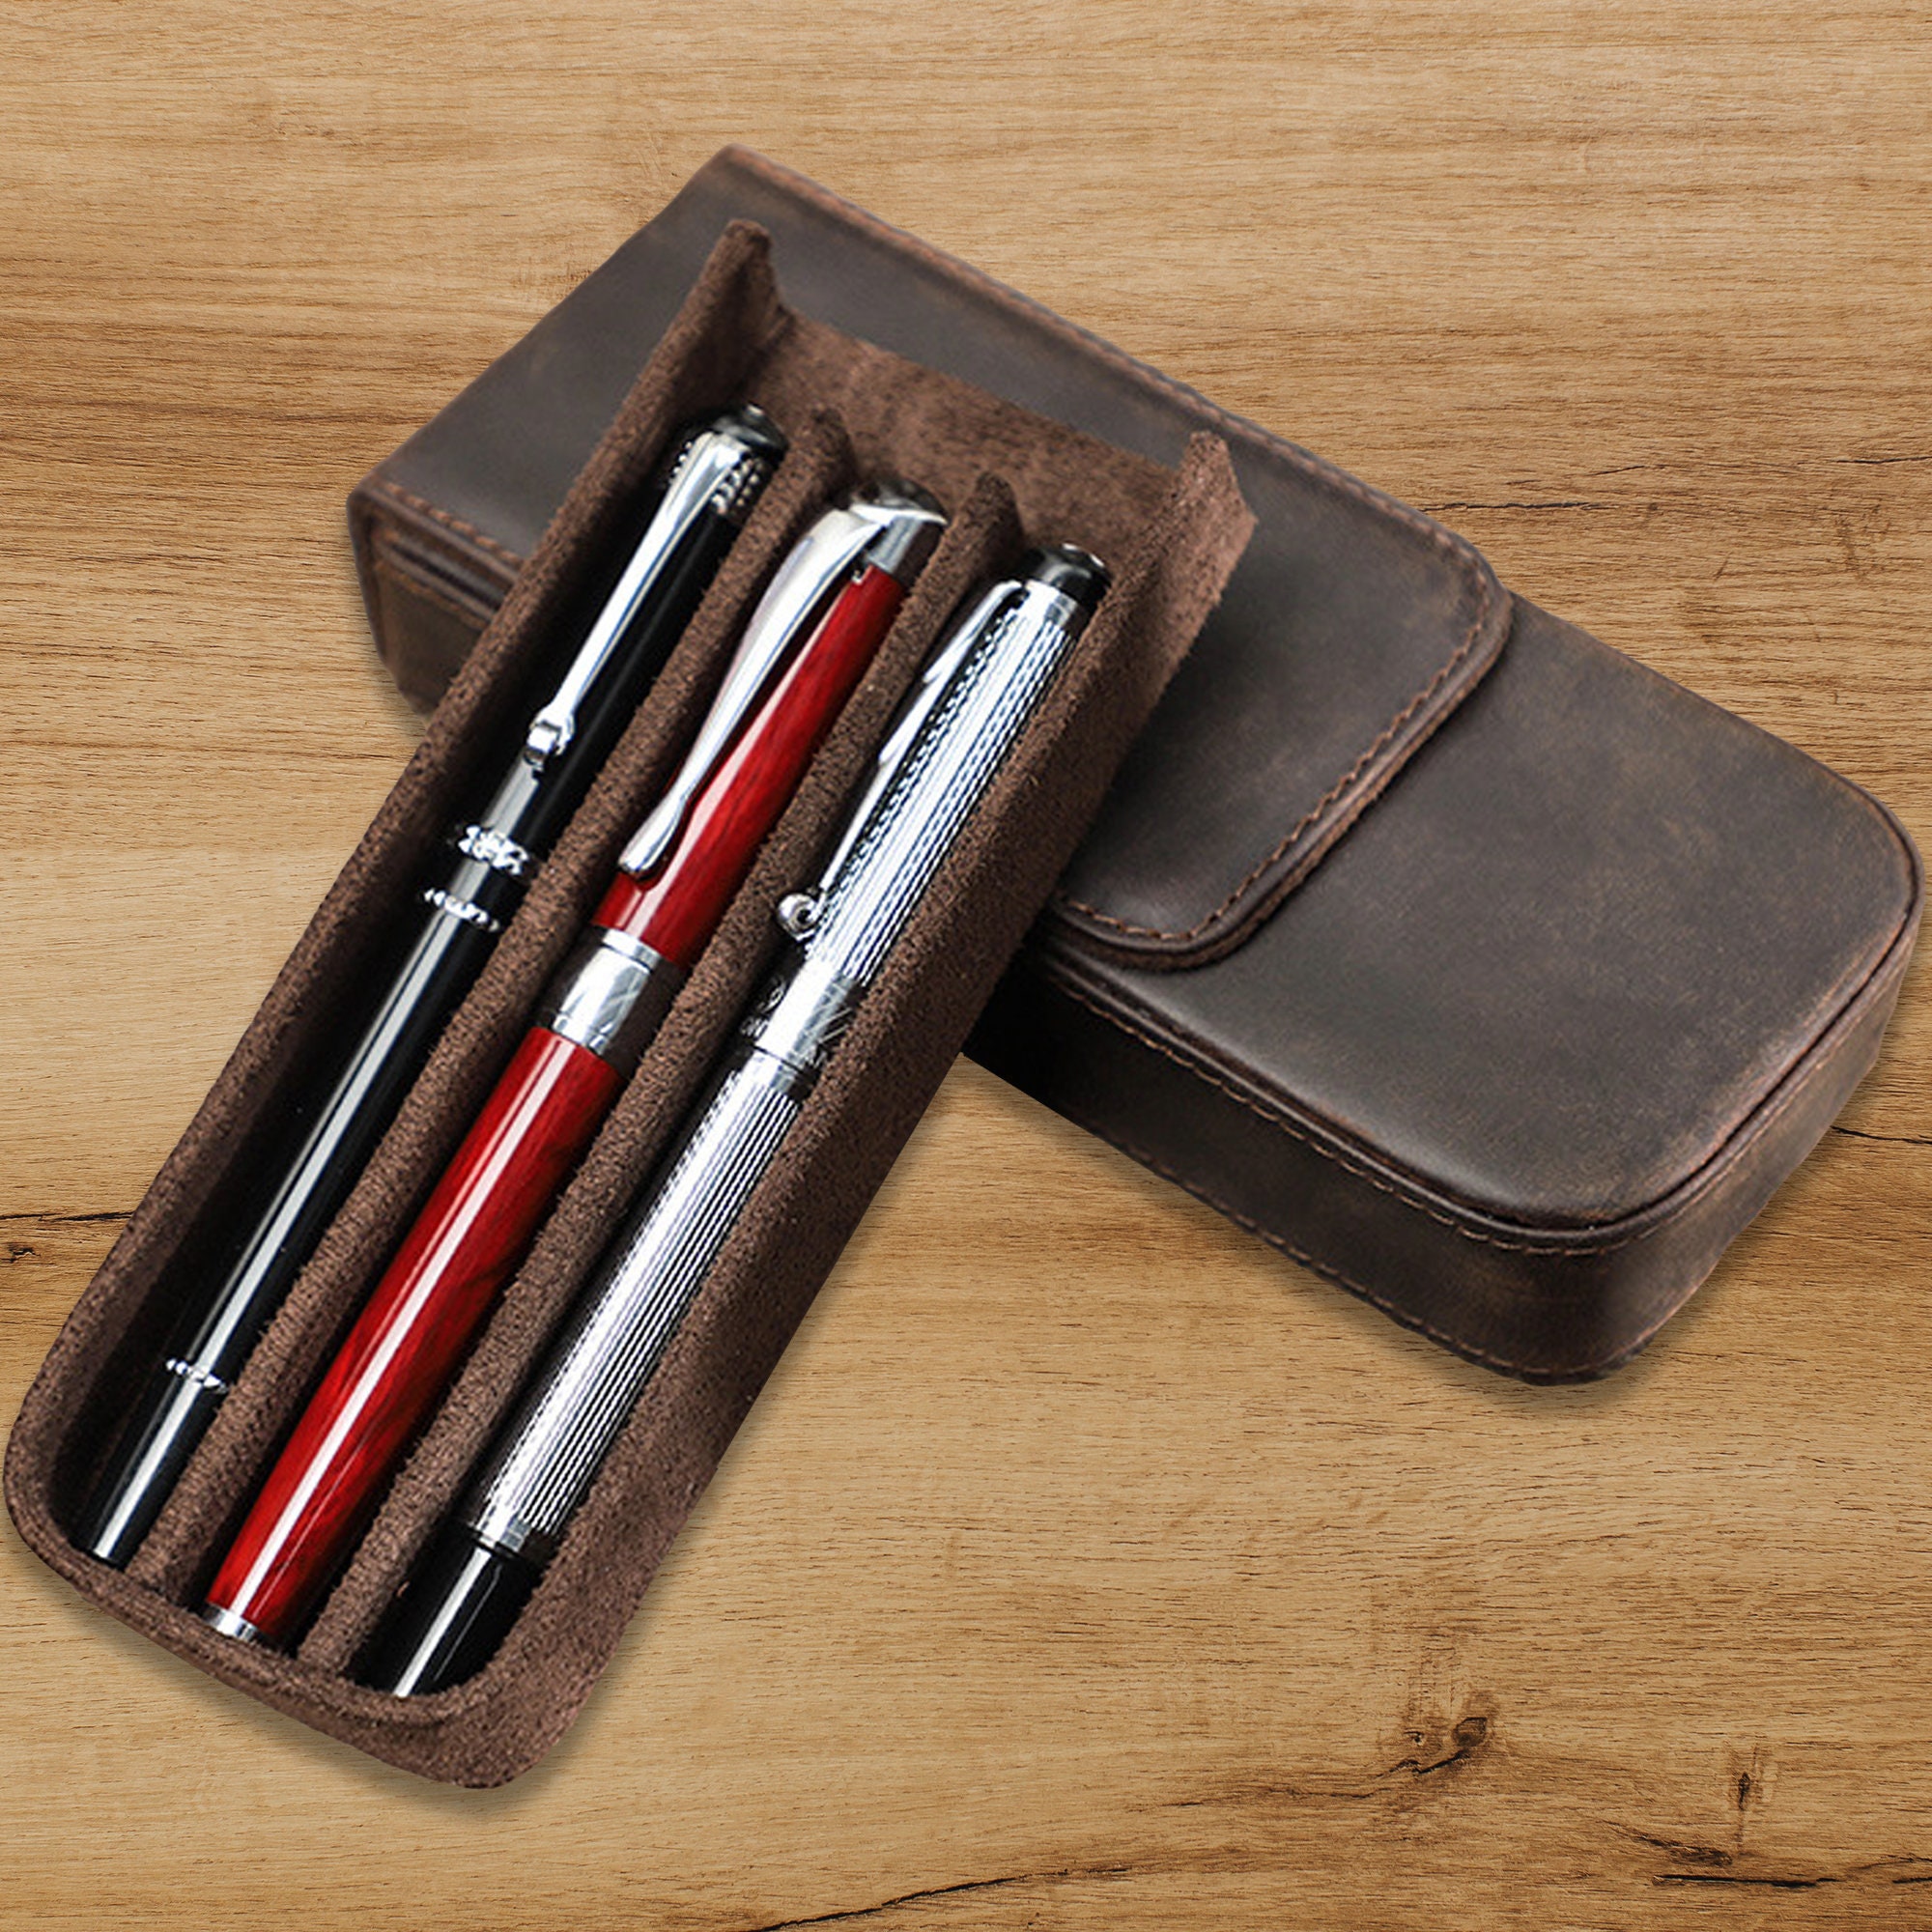 Fountain Pen Case, Leather Pen Case, Pen Holder Personalized, Pencil Case,  Vintage Pen Pouch Engraved, Travel Gift, Birthday Gift 